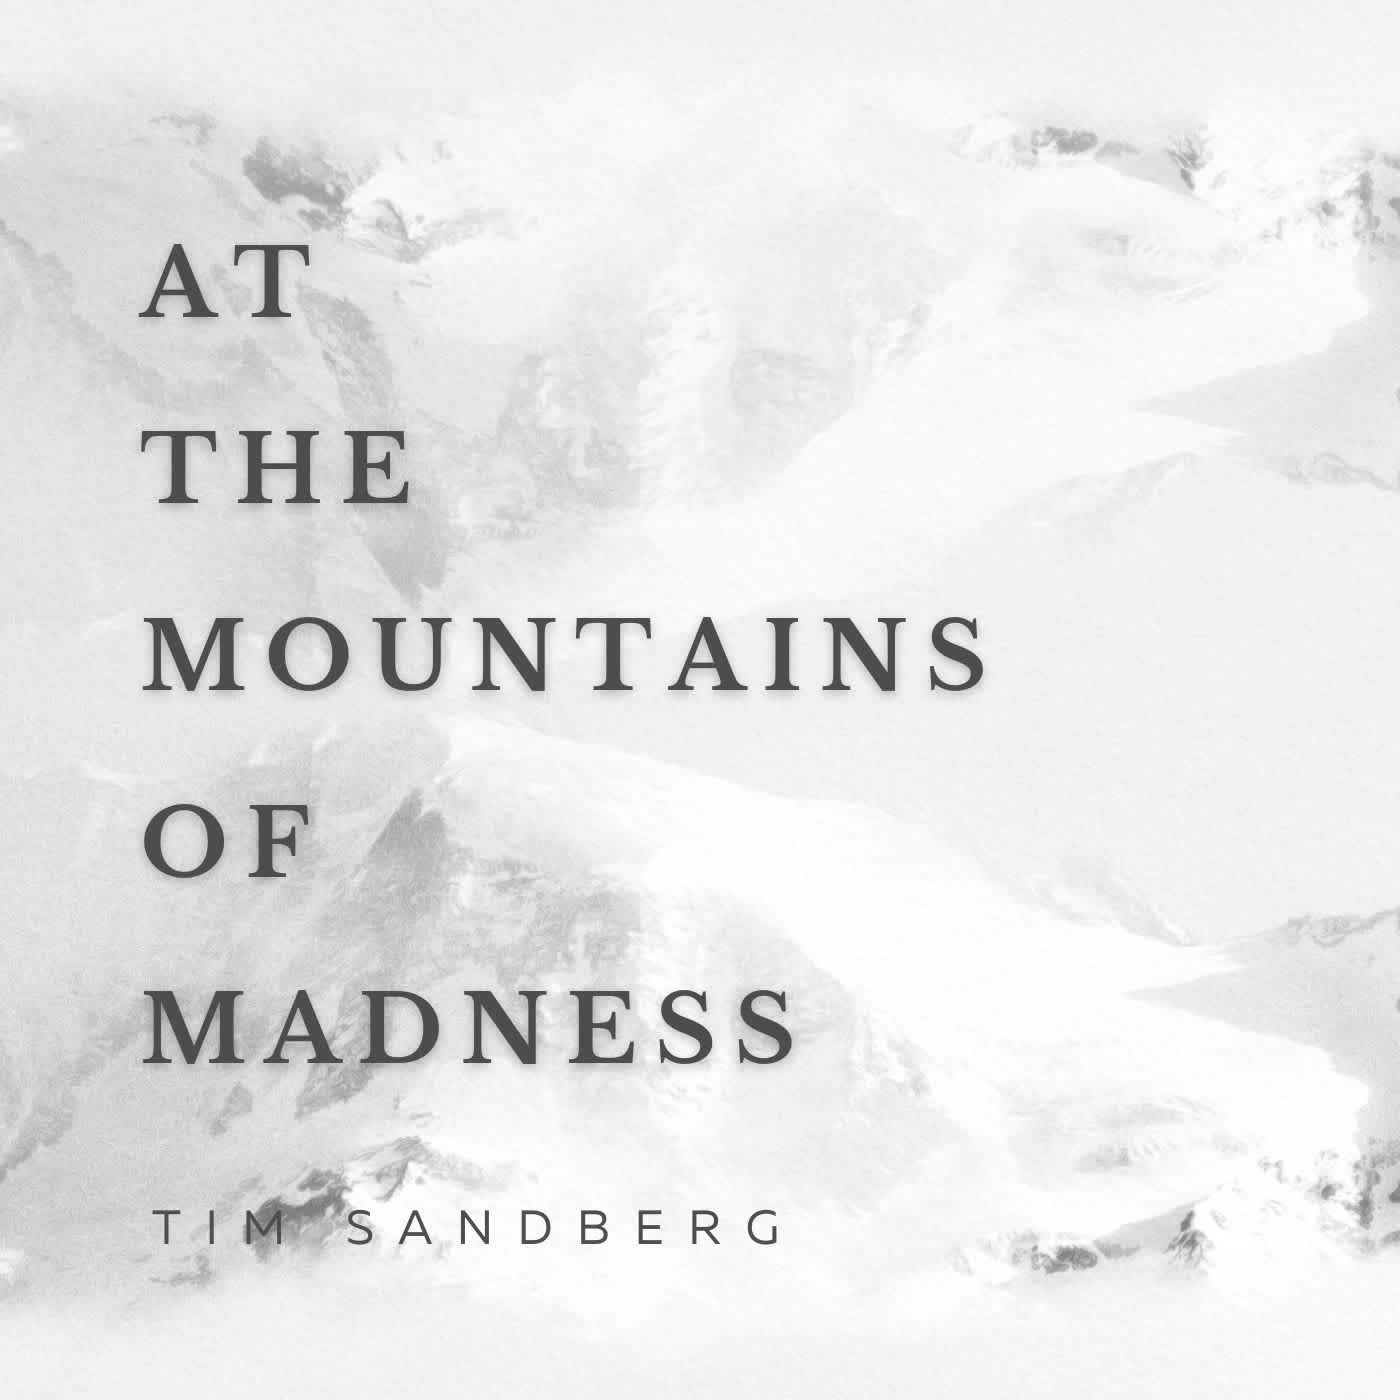 At the Mountains of Madness album cover, black text on a backdrop of huge antarctic mountains barely seen through a snowy blizzard.